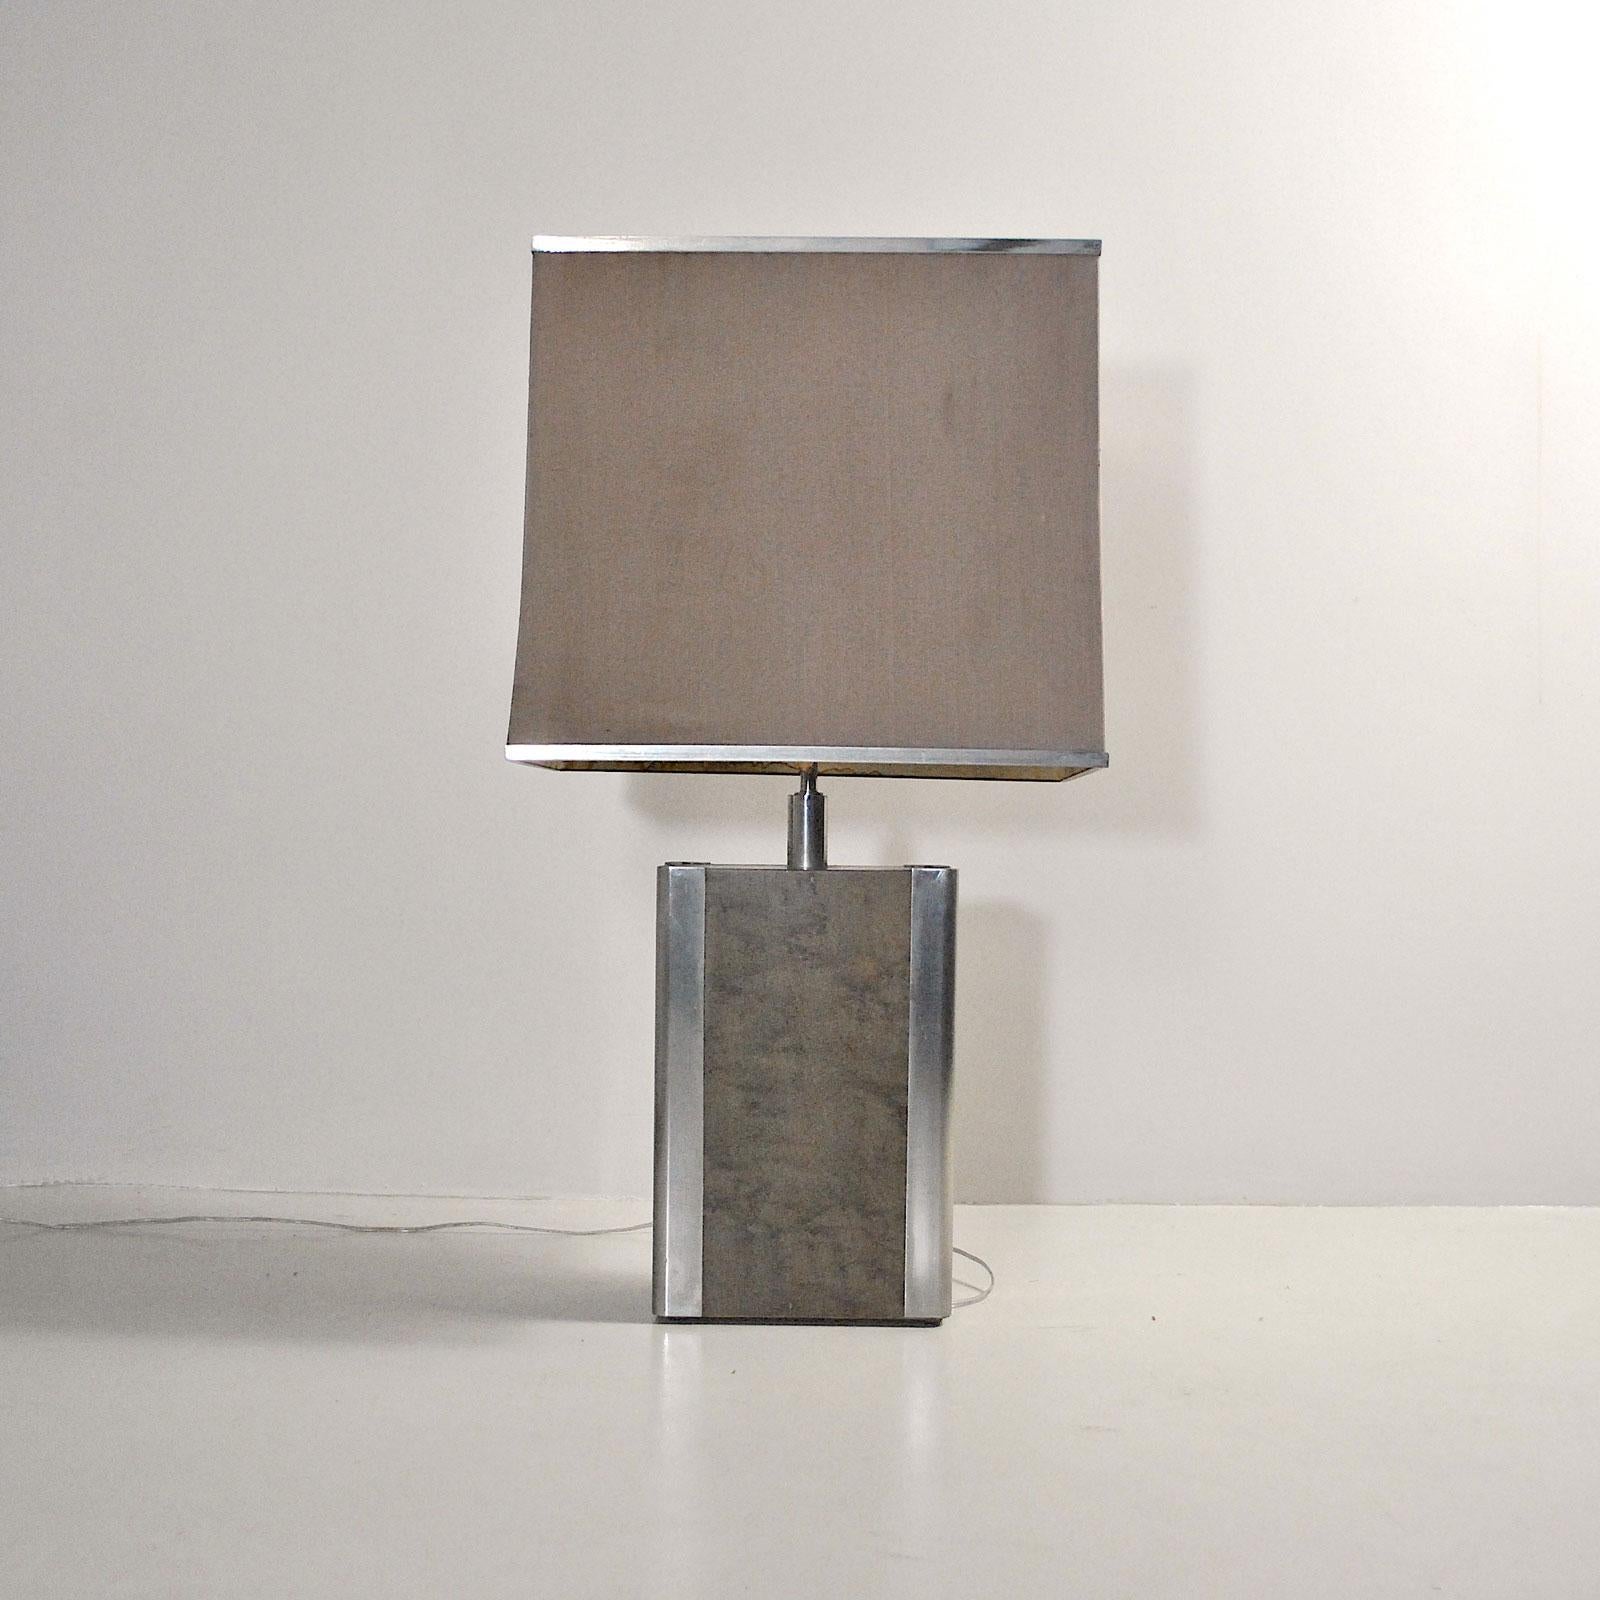 Mid-Century Modern Italian Midcentury Table Lamp in Drawn Wood and Steel from the 1970s For Sale